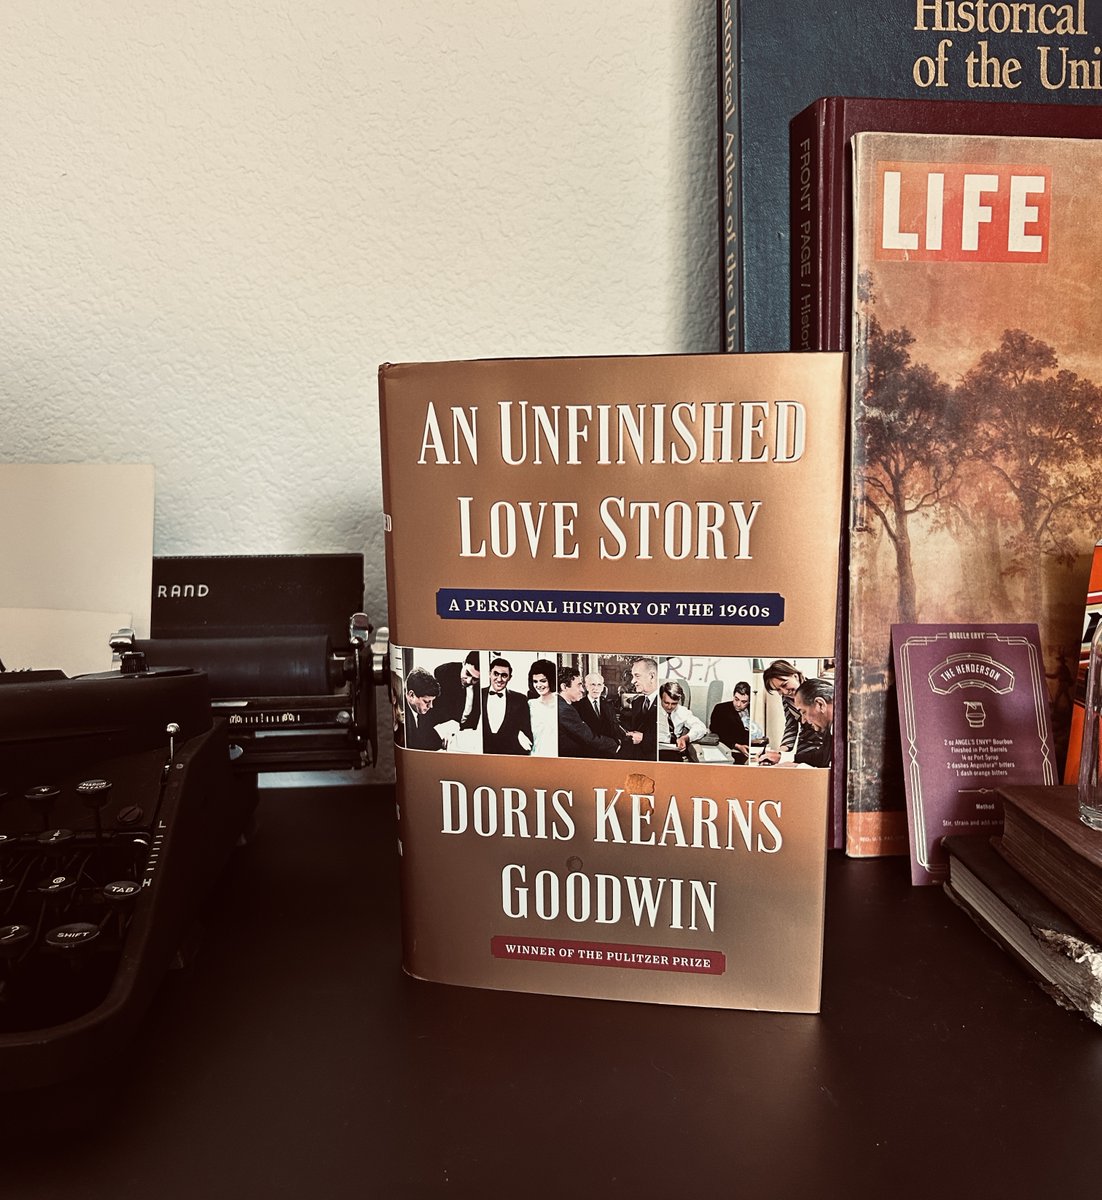 It took me three days to finish this book, leaving me in tears when I reached the end. Richard Goodwin 'participated in an inordinate number of pivotal, defining moments of the [Sixties].' He campaigned with JFK for sixty straight days aboard Jack's private plan. He helped JFK…